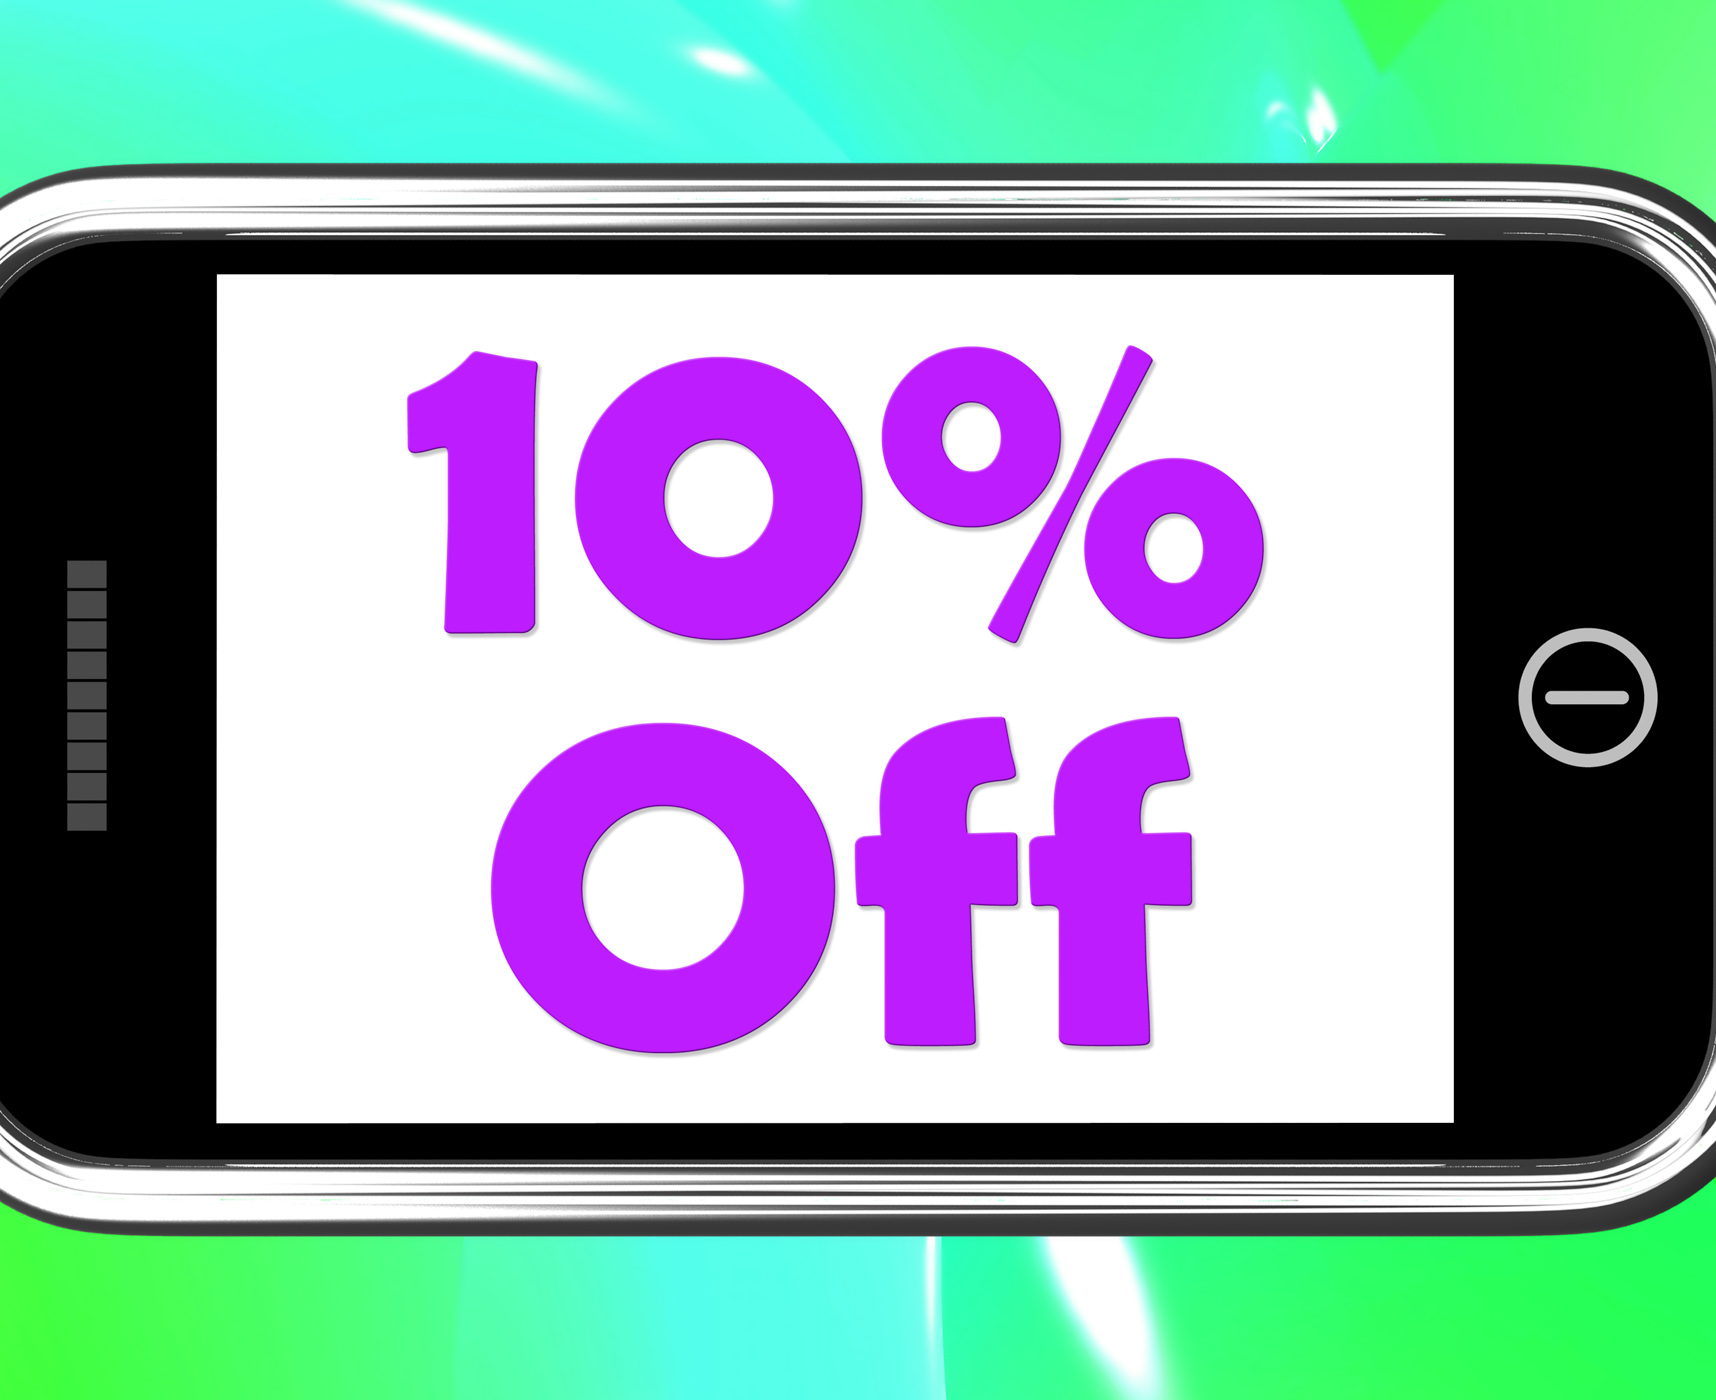 Ten percent phone shows sale discount or 10 off photo